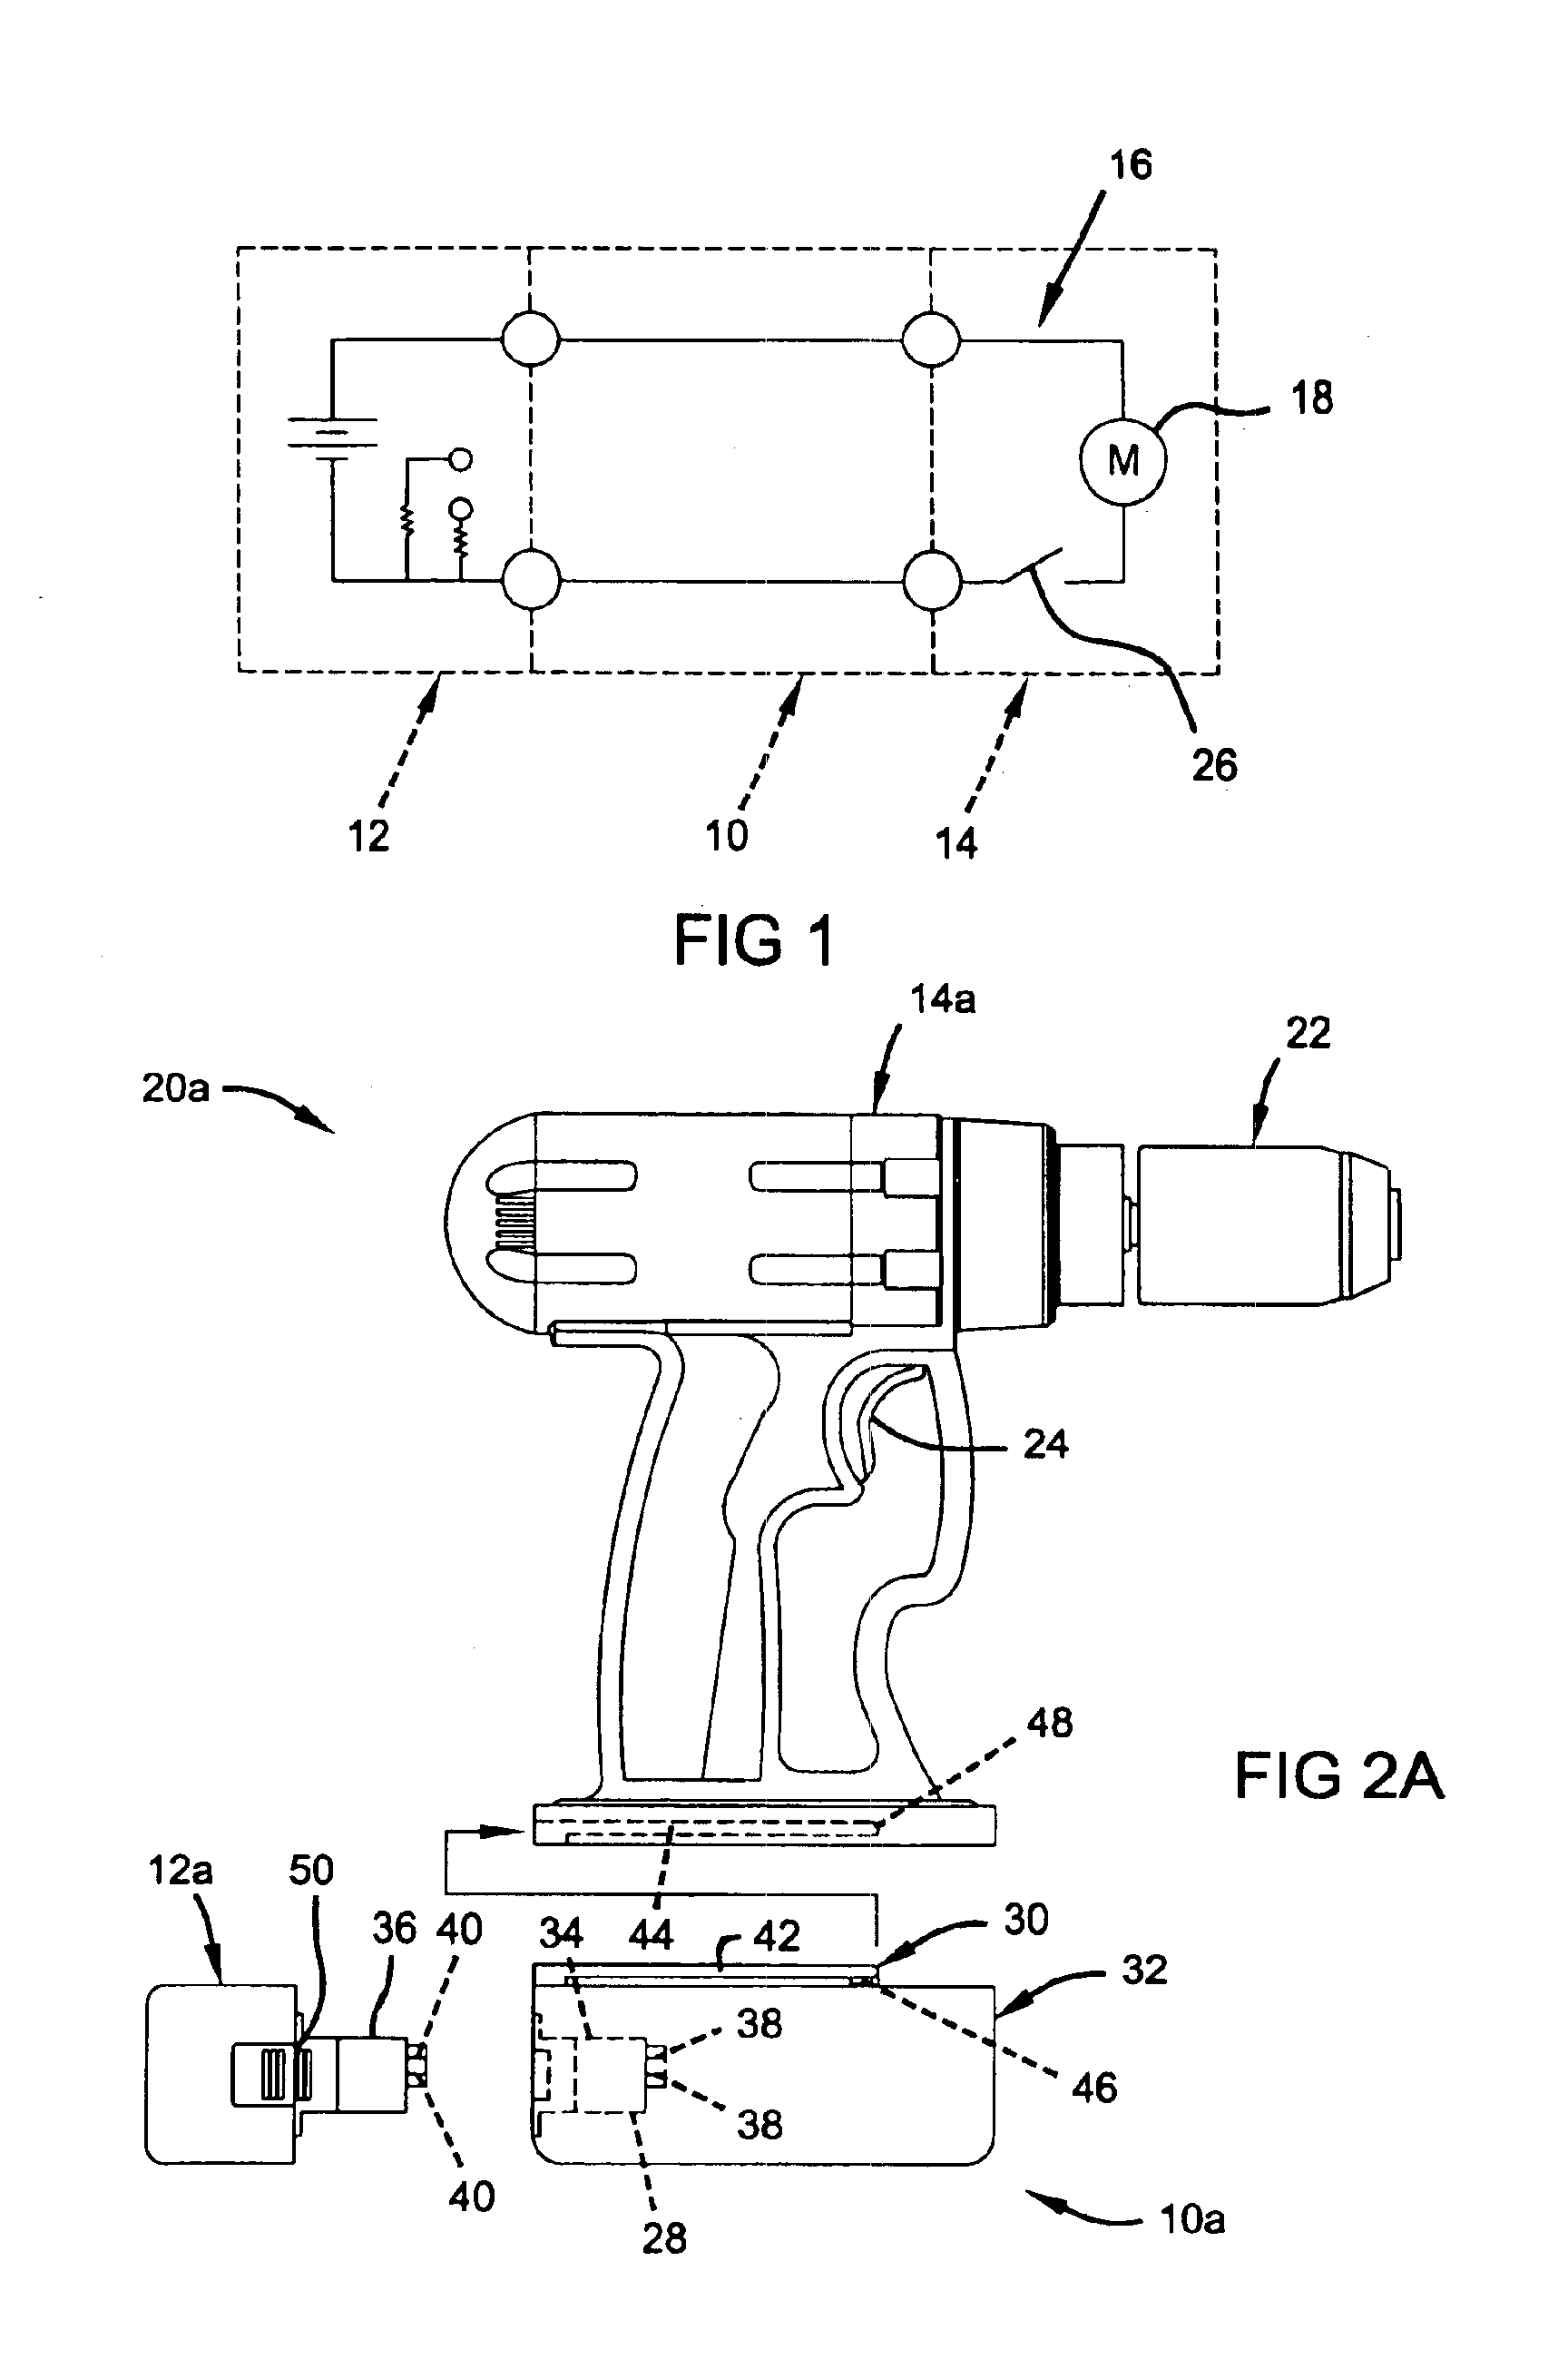 Battery adapter for a cordless power tool system and related method